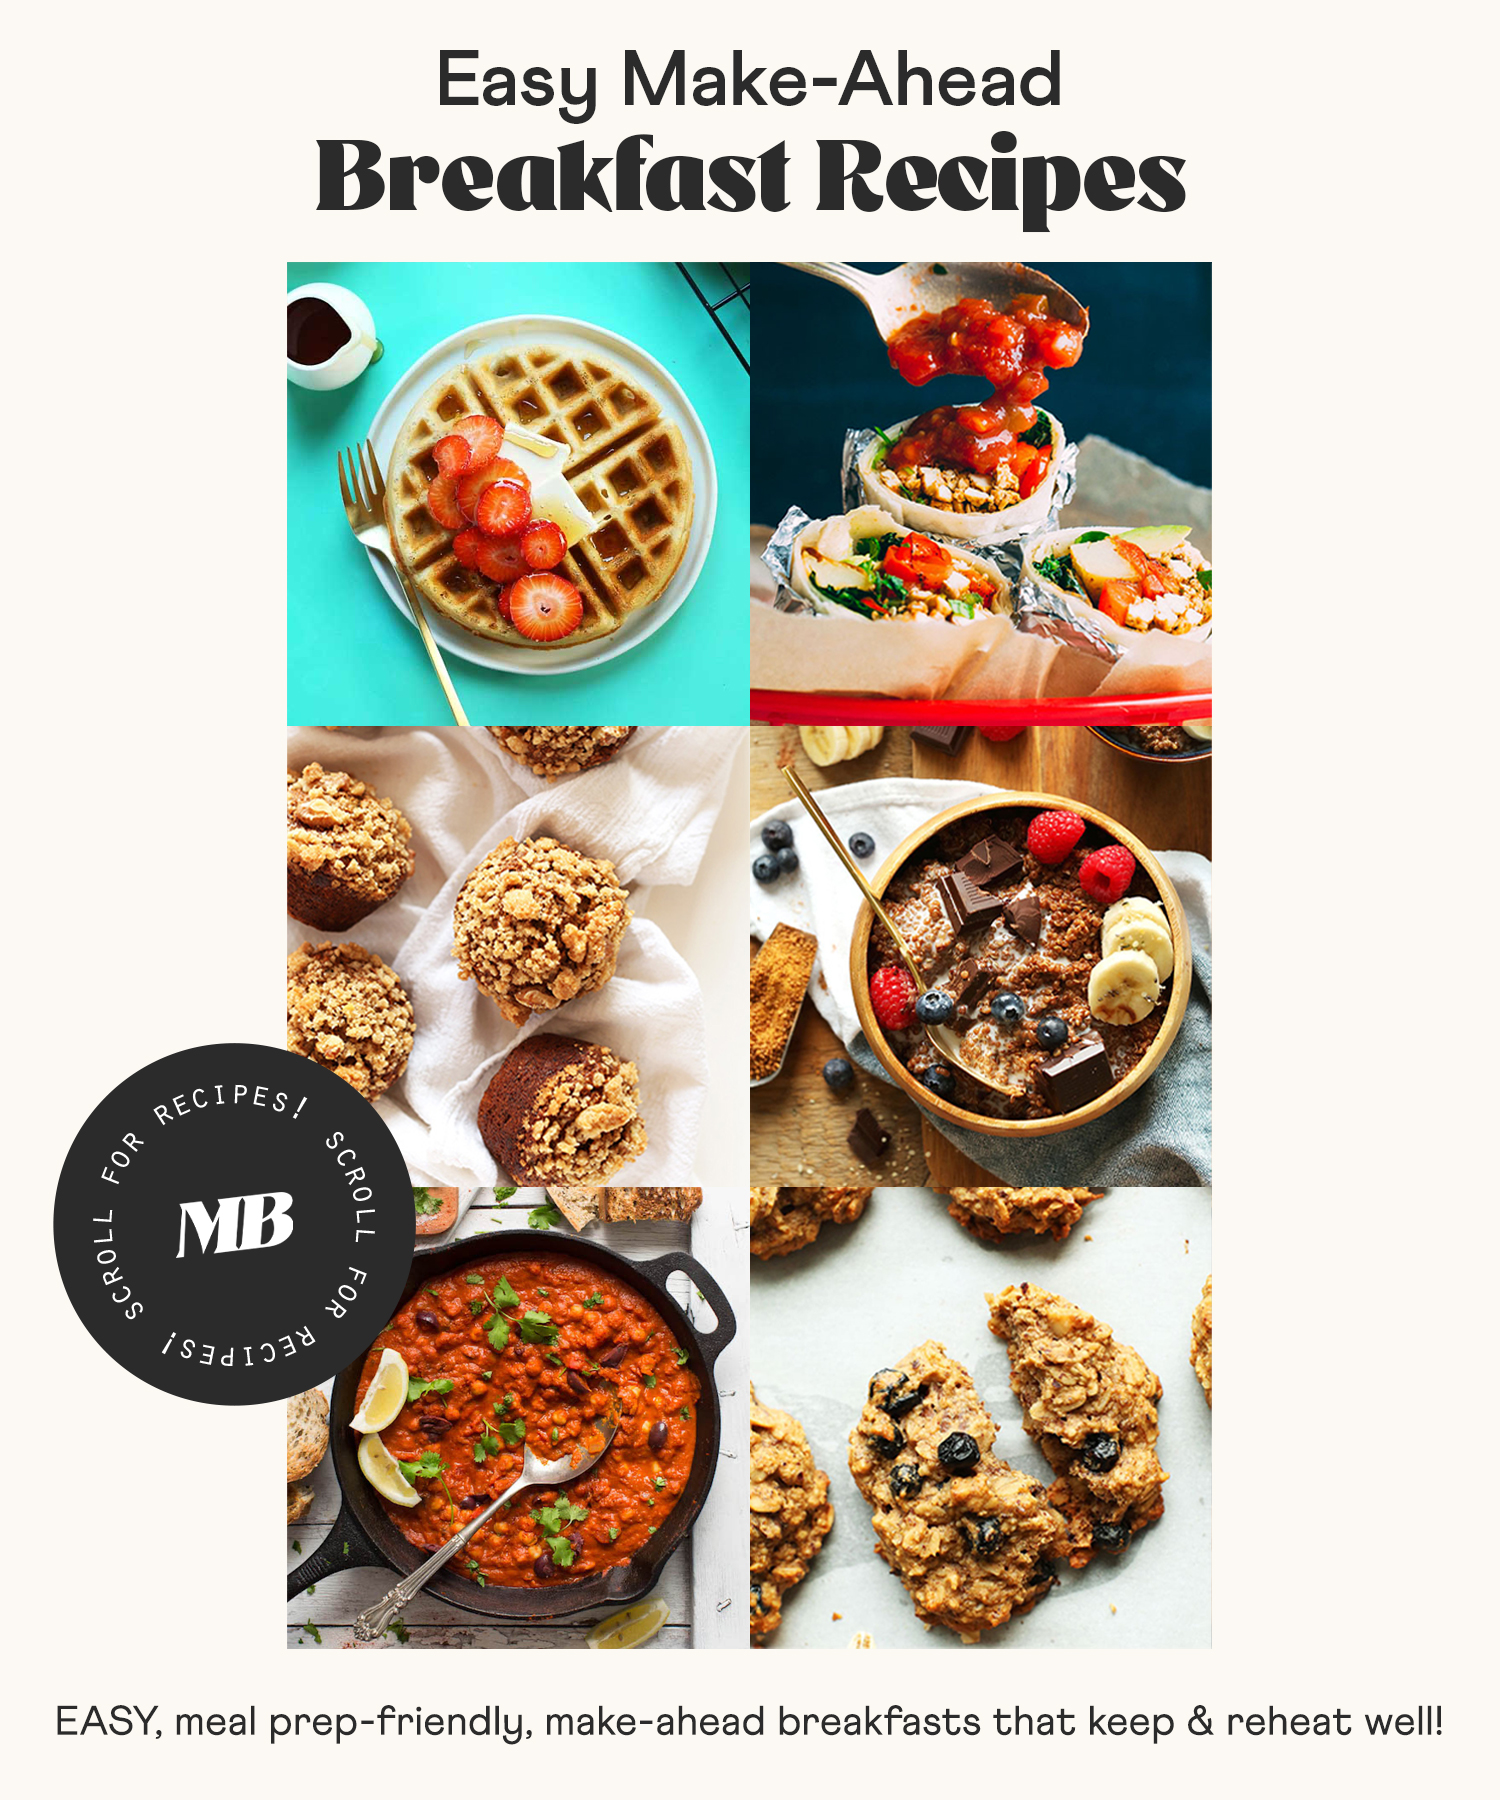 Photos of muffins, waffles, and other make-ahead breakfast recipes